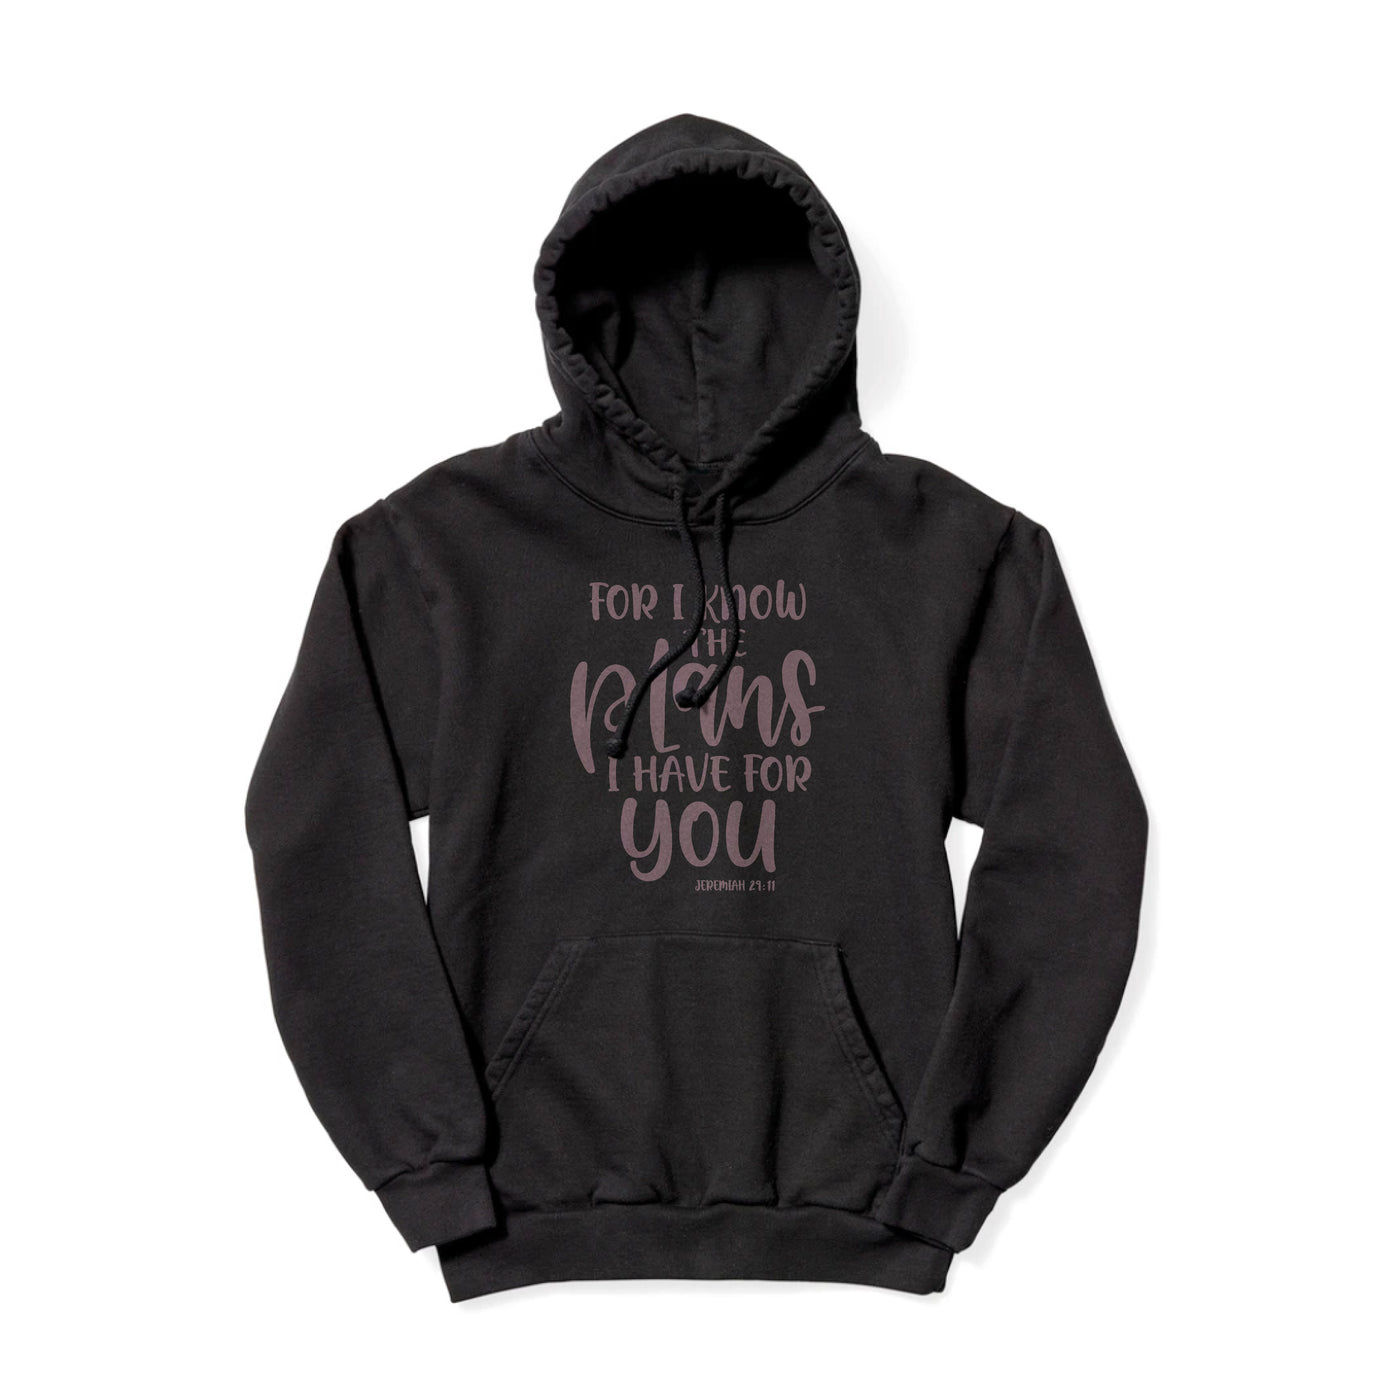 Jeremiah 29:11 Bible Verse Pullover Hoodie-Good Work(s) Make A Difference® | Christian and Inspirational Jewelry Company in Vernon, California